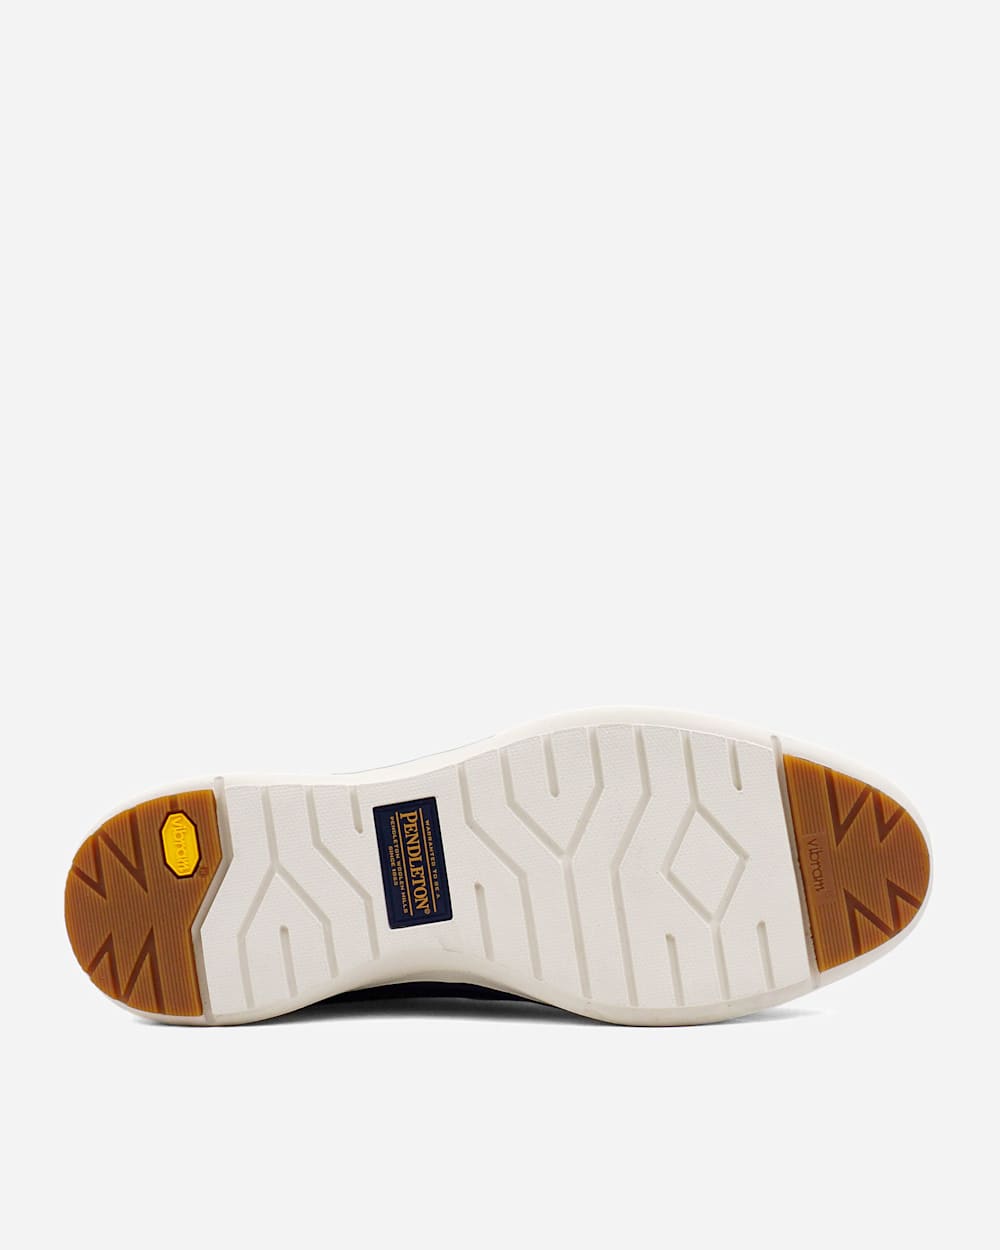 ALTERNATE VIEW OF WOMEN'S PENDLETON WOOL SNEAKERS IN TUSCANY HEATHER image number 5